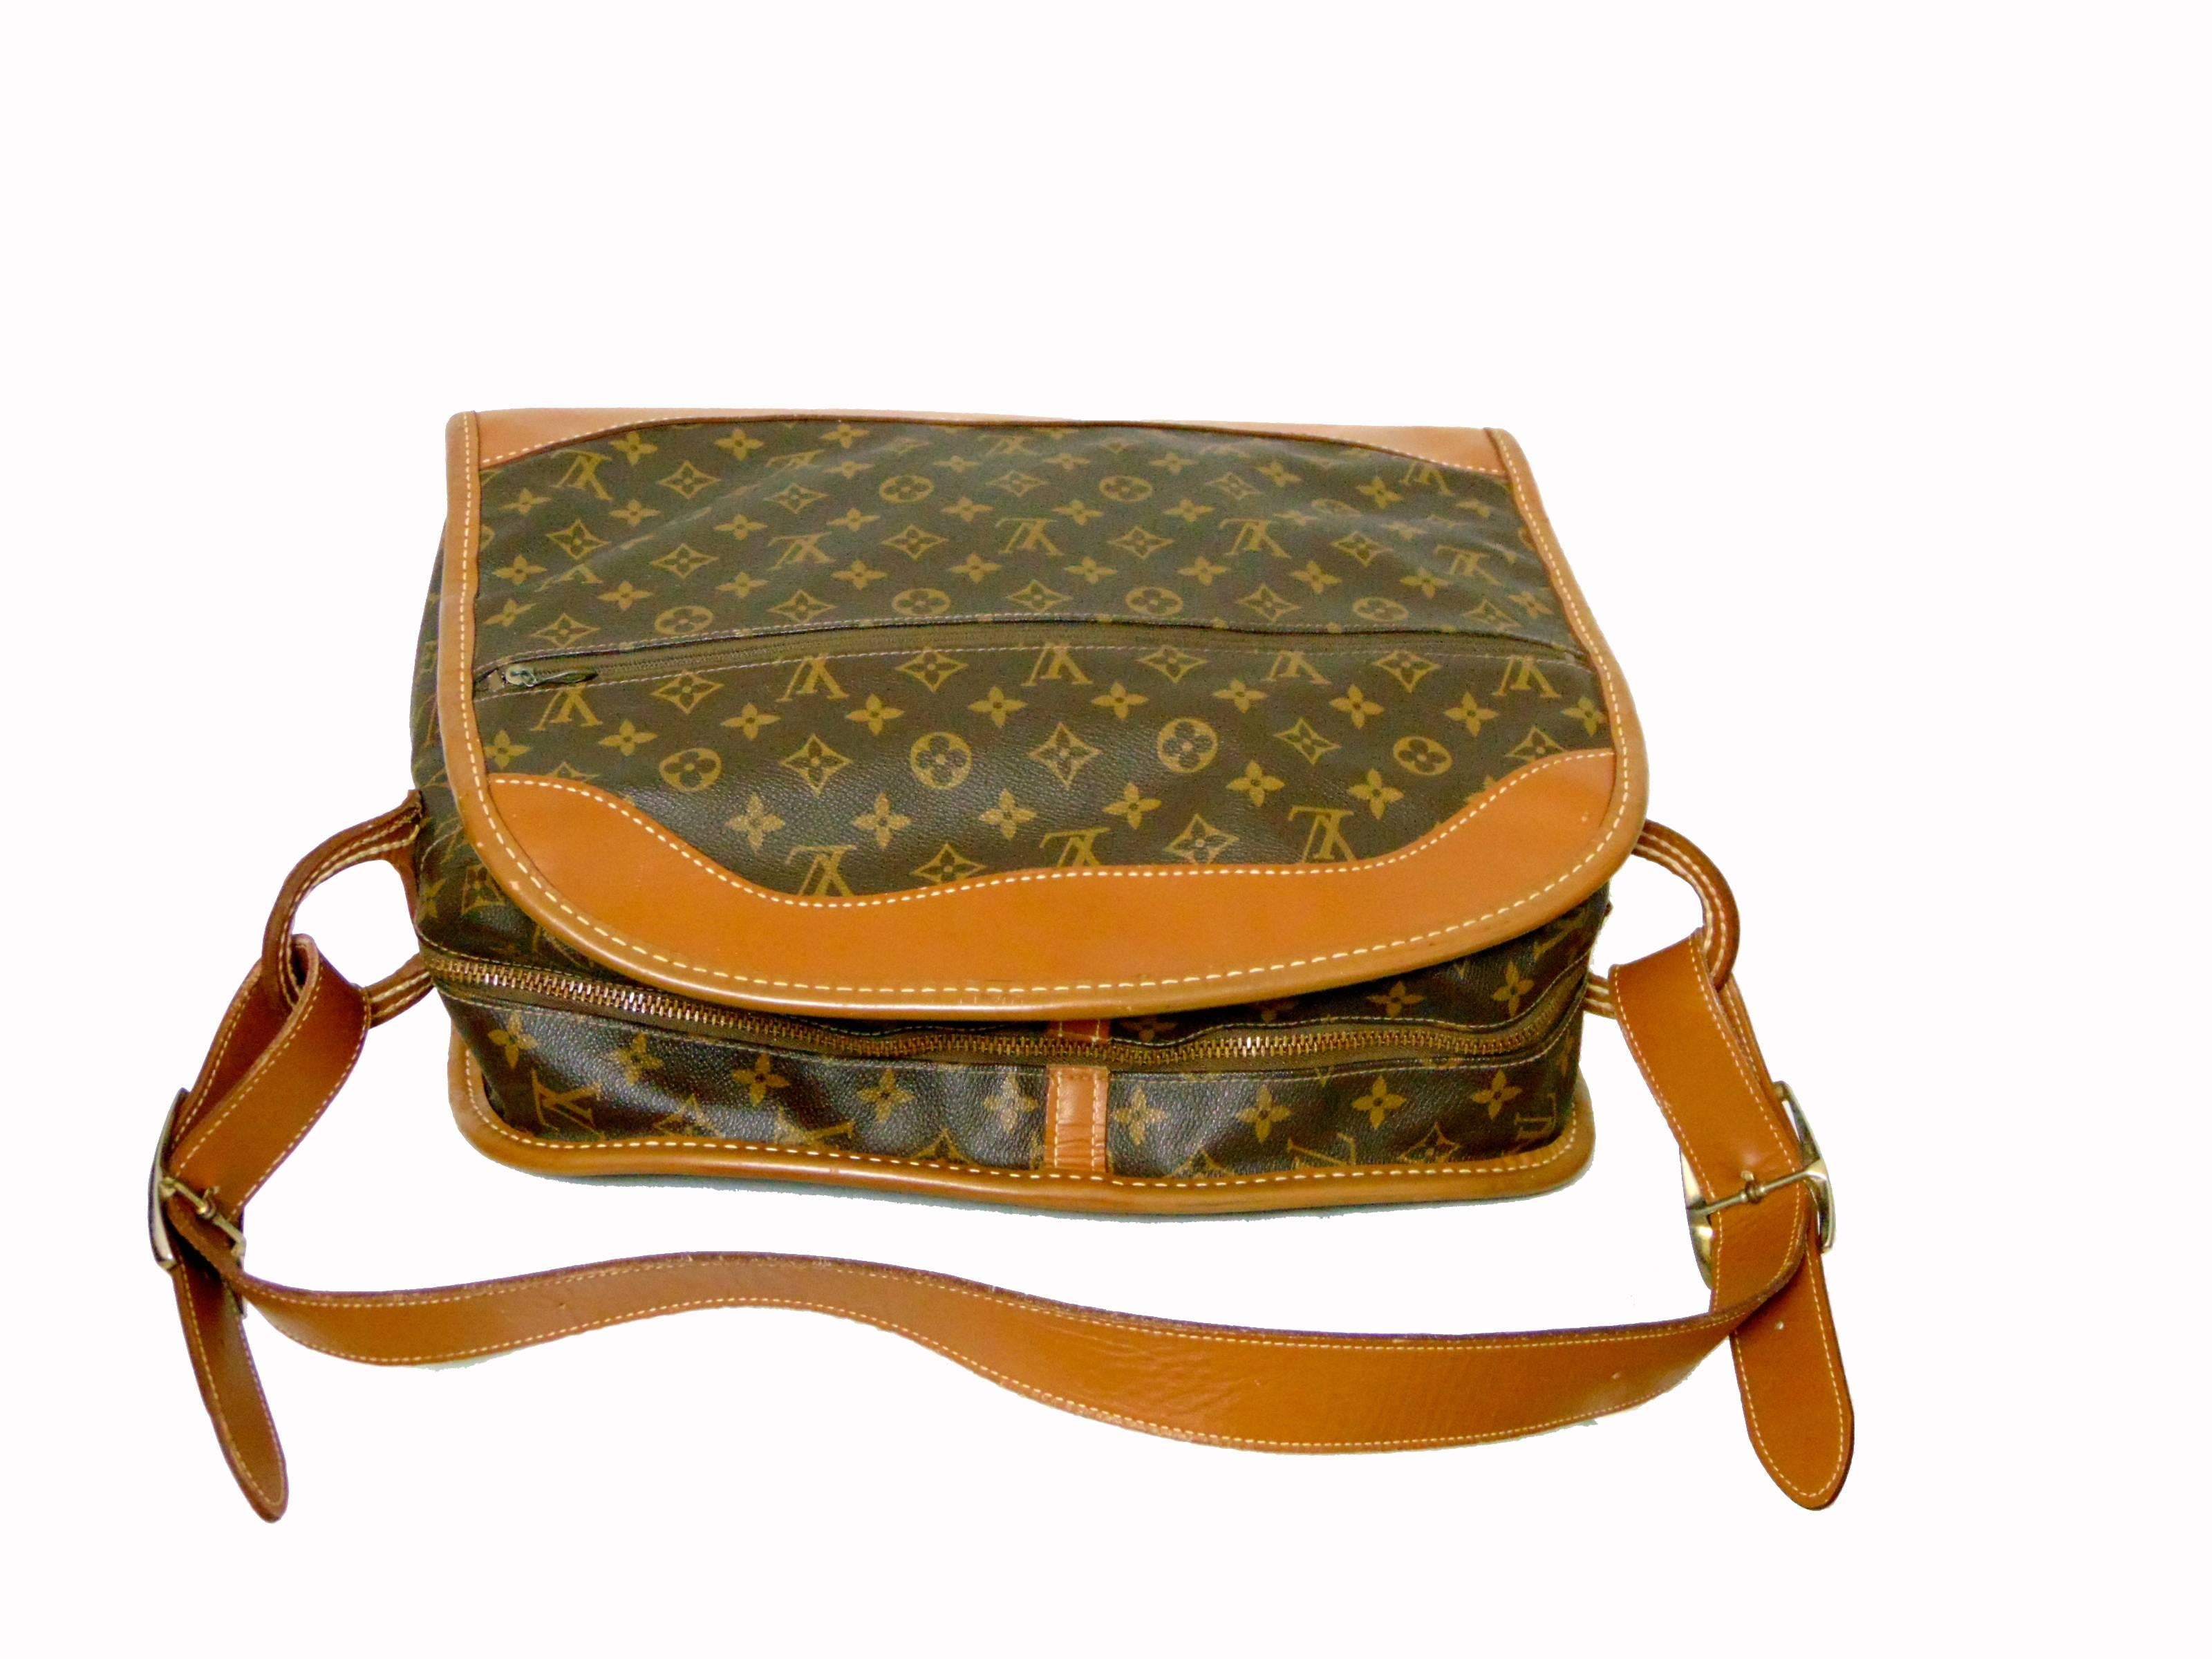 Women's Louis Vuitton The French Company Carry On Travel Bag Monogram Canvas 1970s